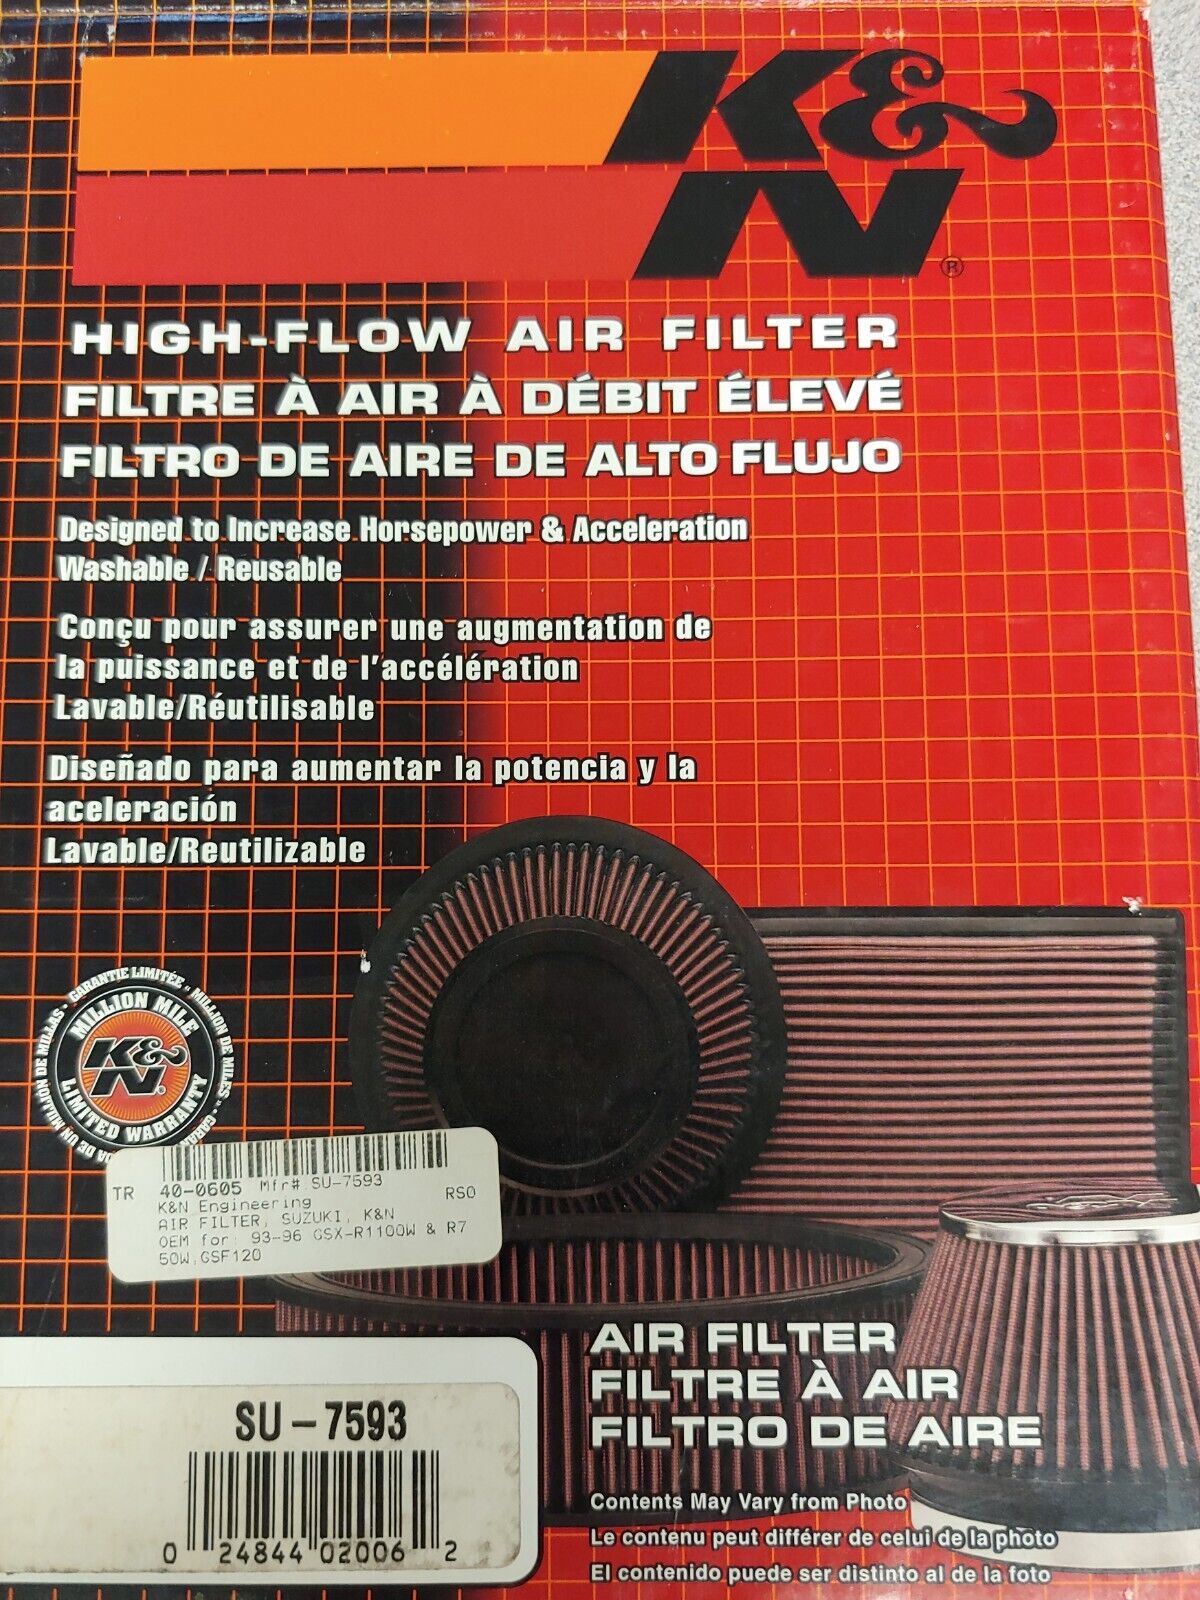 NEW K&N AIR FILTER SU-7593 - FITS 1992 - 2000 GSXR AND GSF MODELS